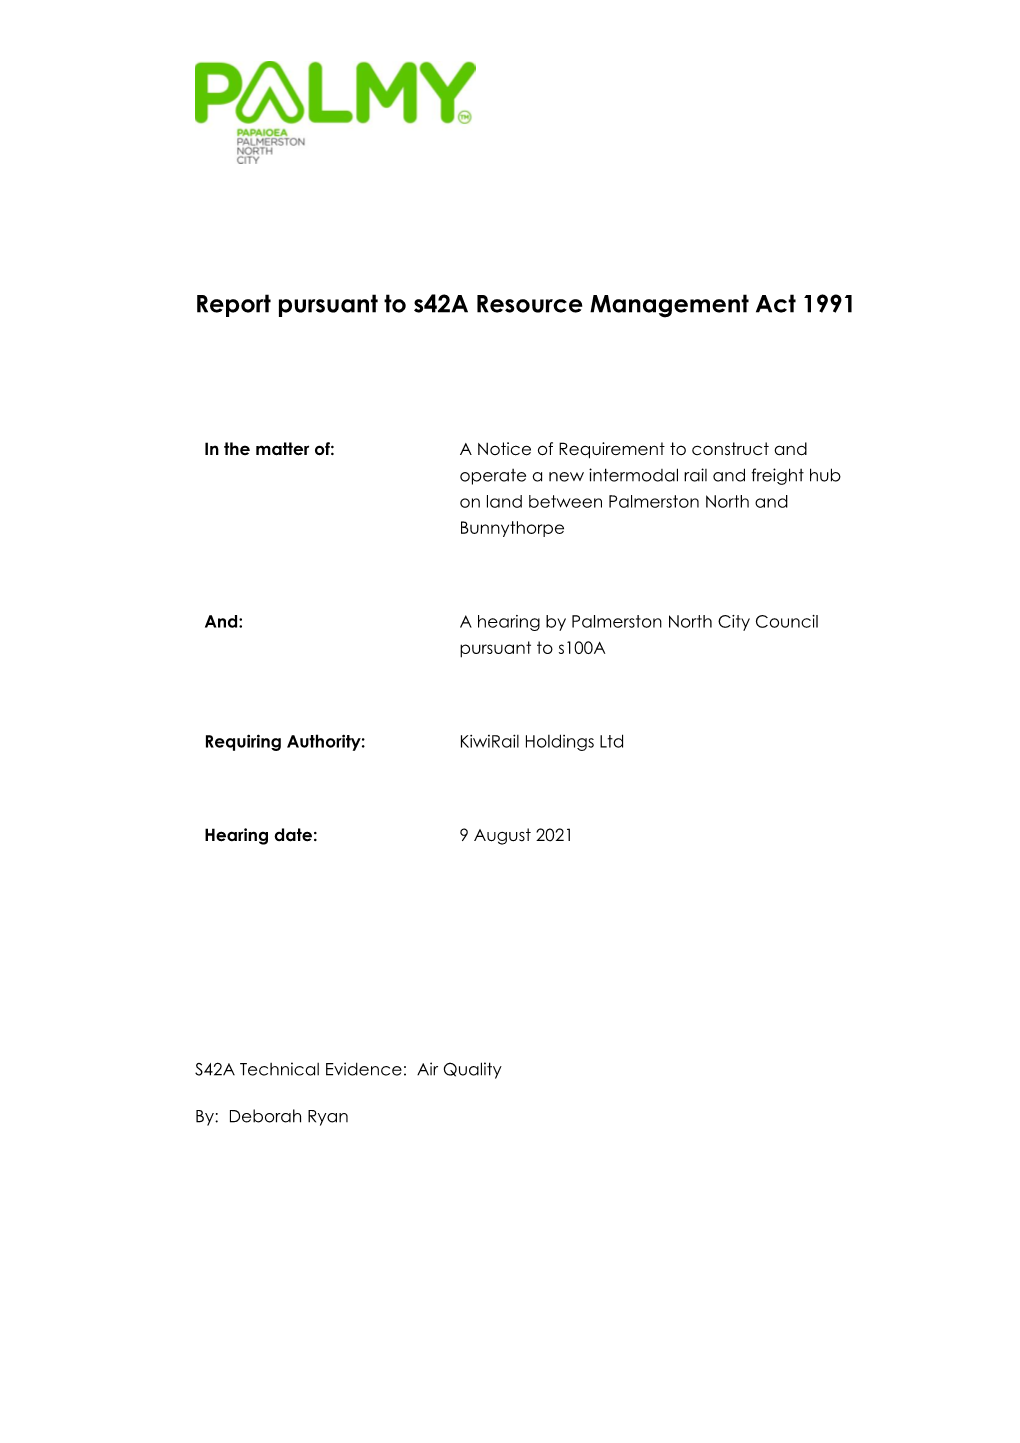 Report Pursuant to S42a Resource Management Act 1991